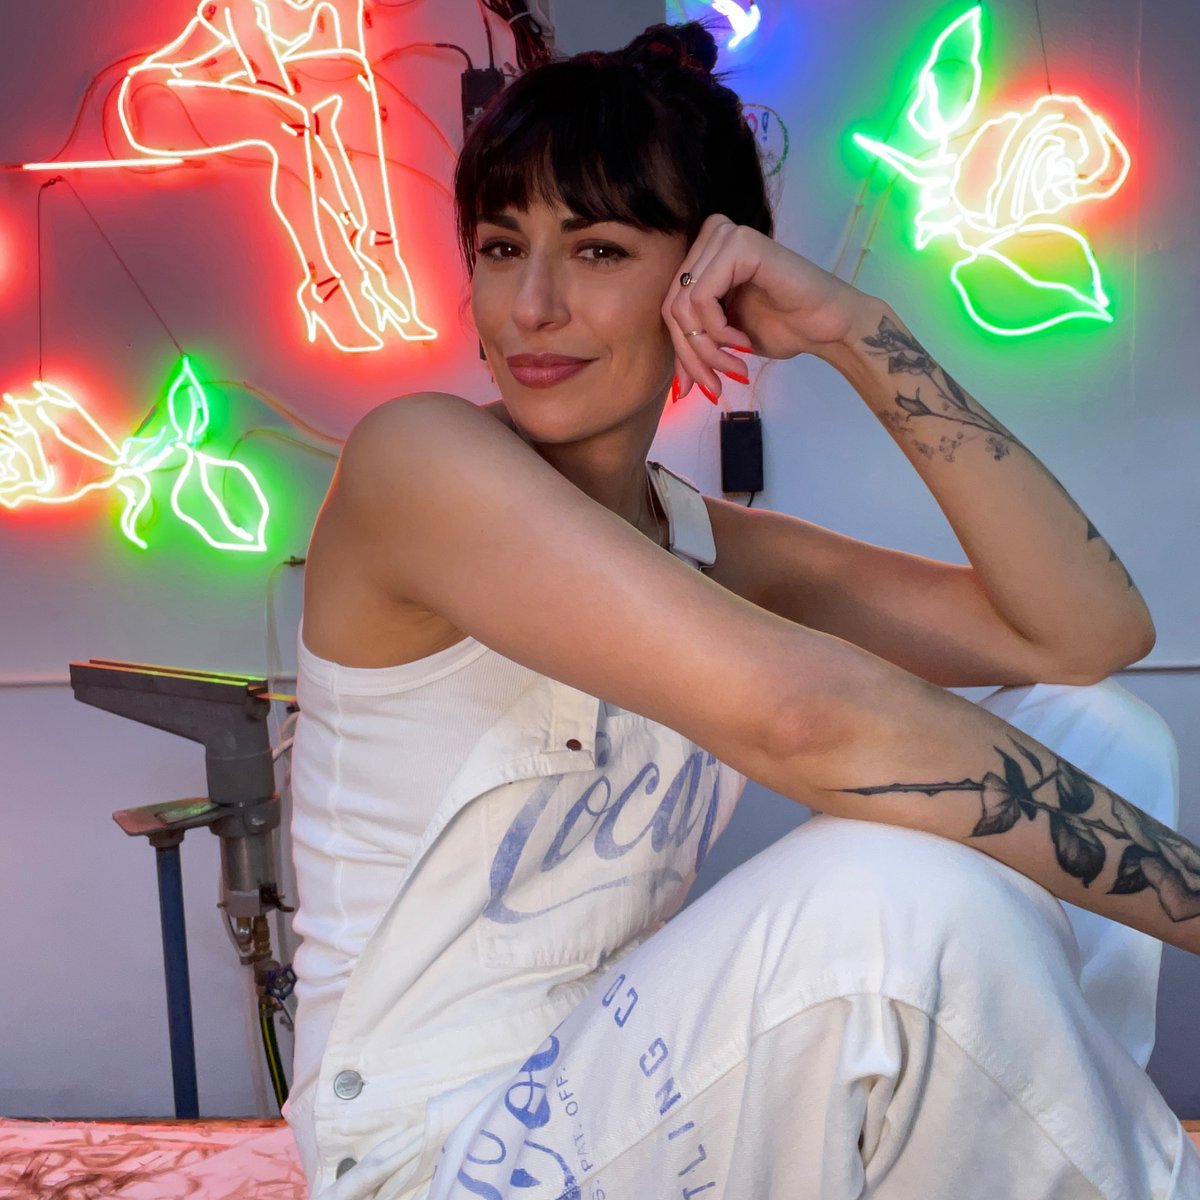 Meet Leticia Maldonado: a neon glass artist and multimedia sculptor who seeks to encourage connection with one’s self through imagination and creative destruction

Check it out as she puts a disruptive twist on our #LuckyBrandCocaCola collection @CocaCola

bit.ly/45zg3uz